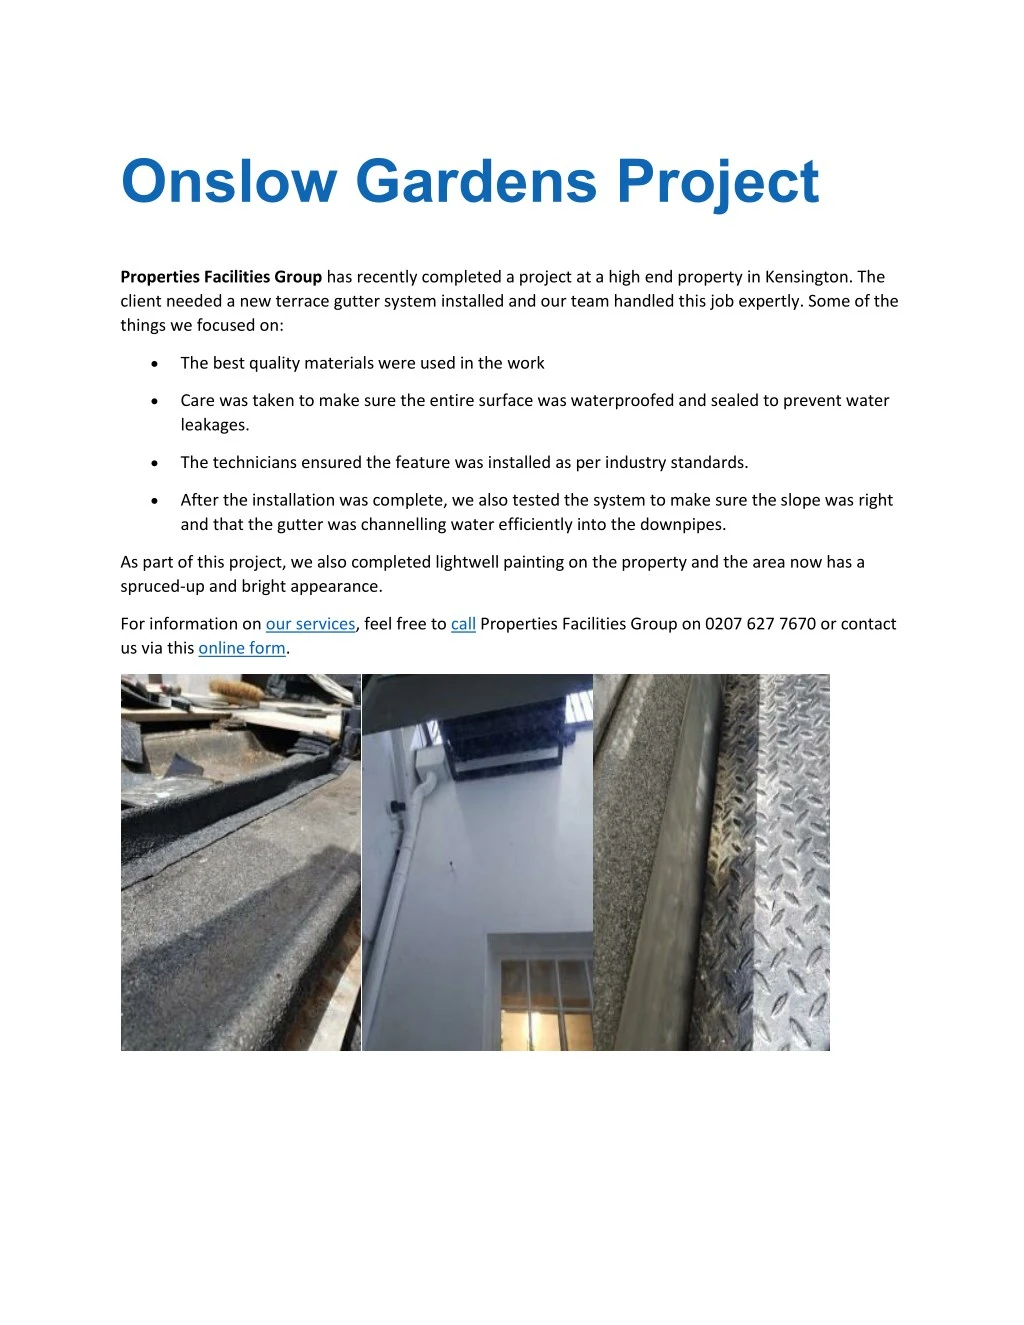 onslow gardens project